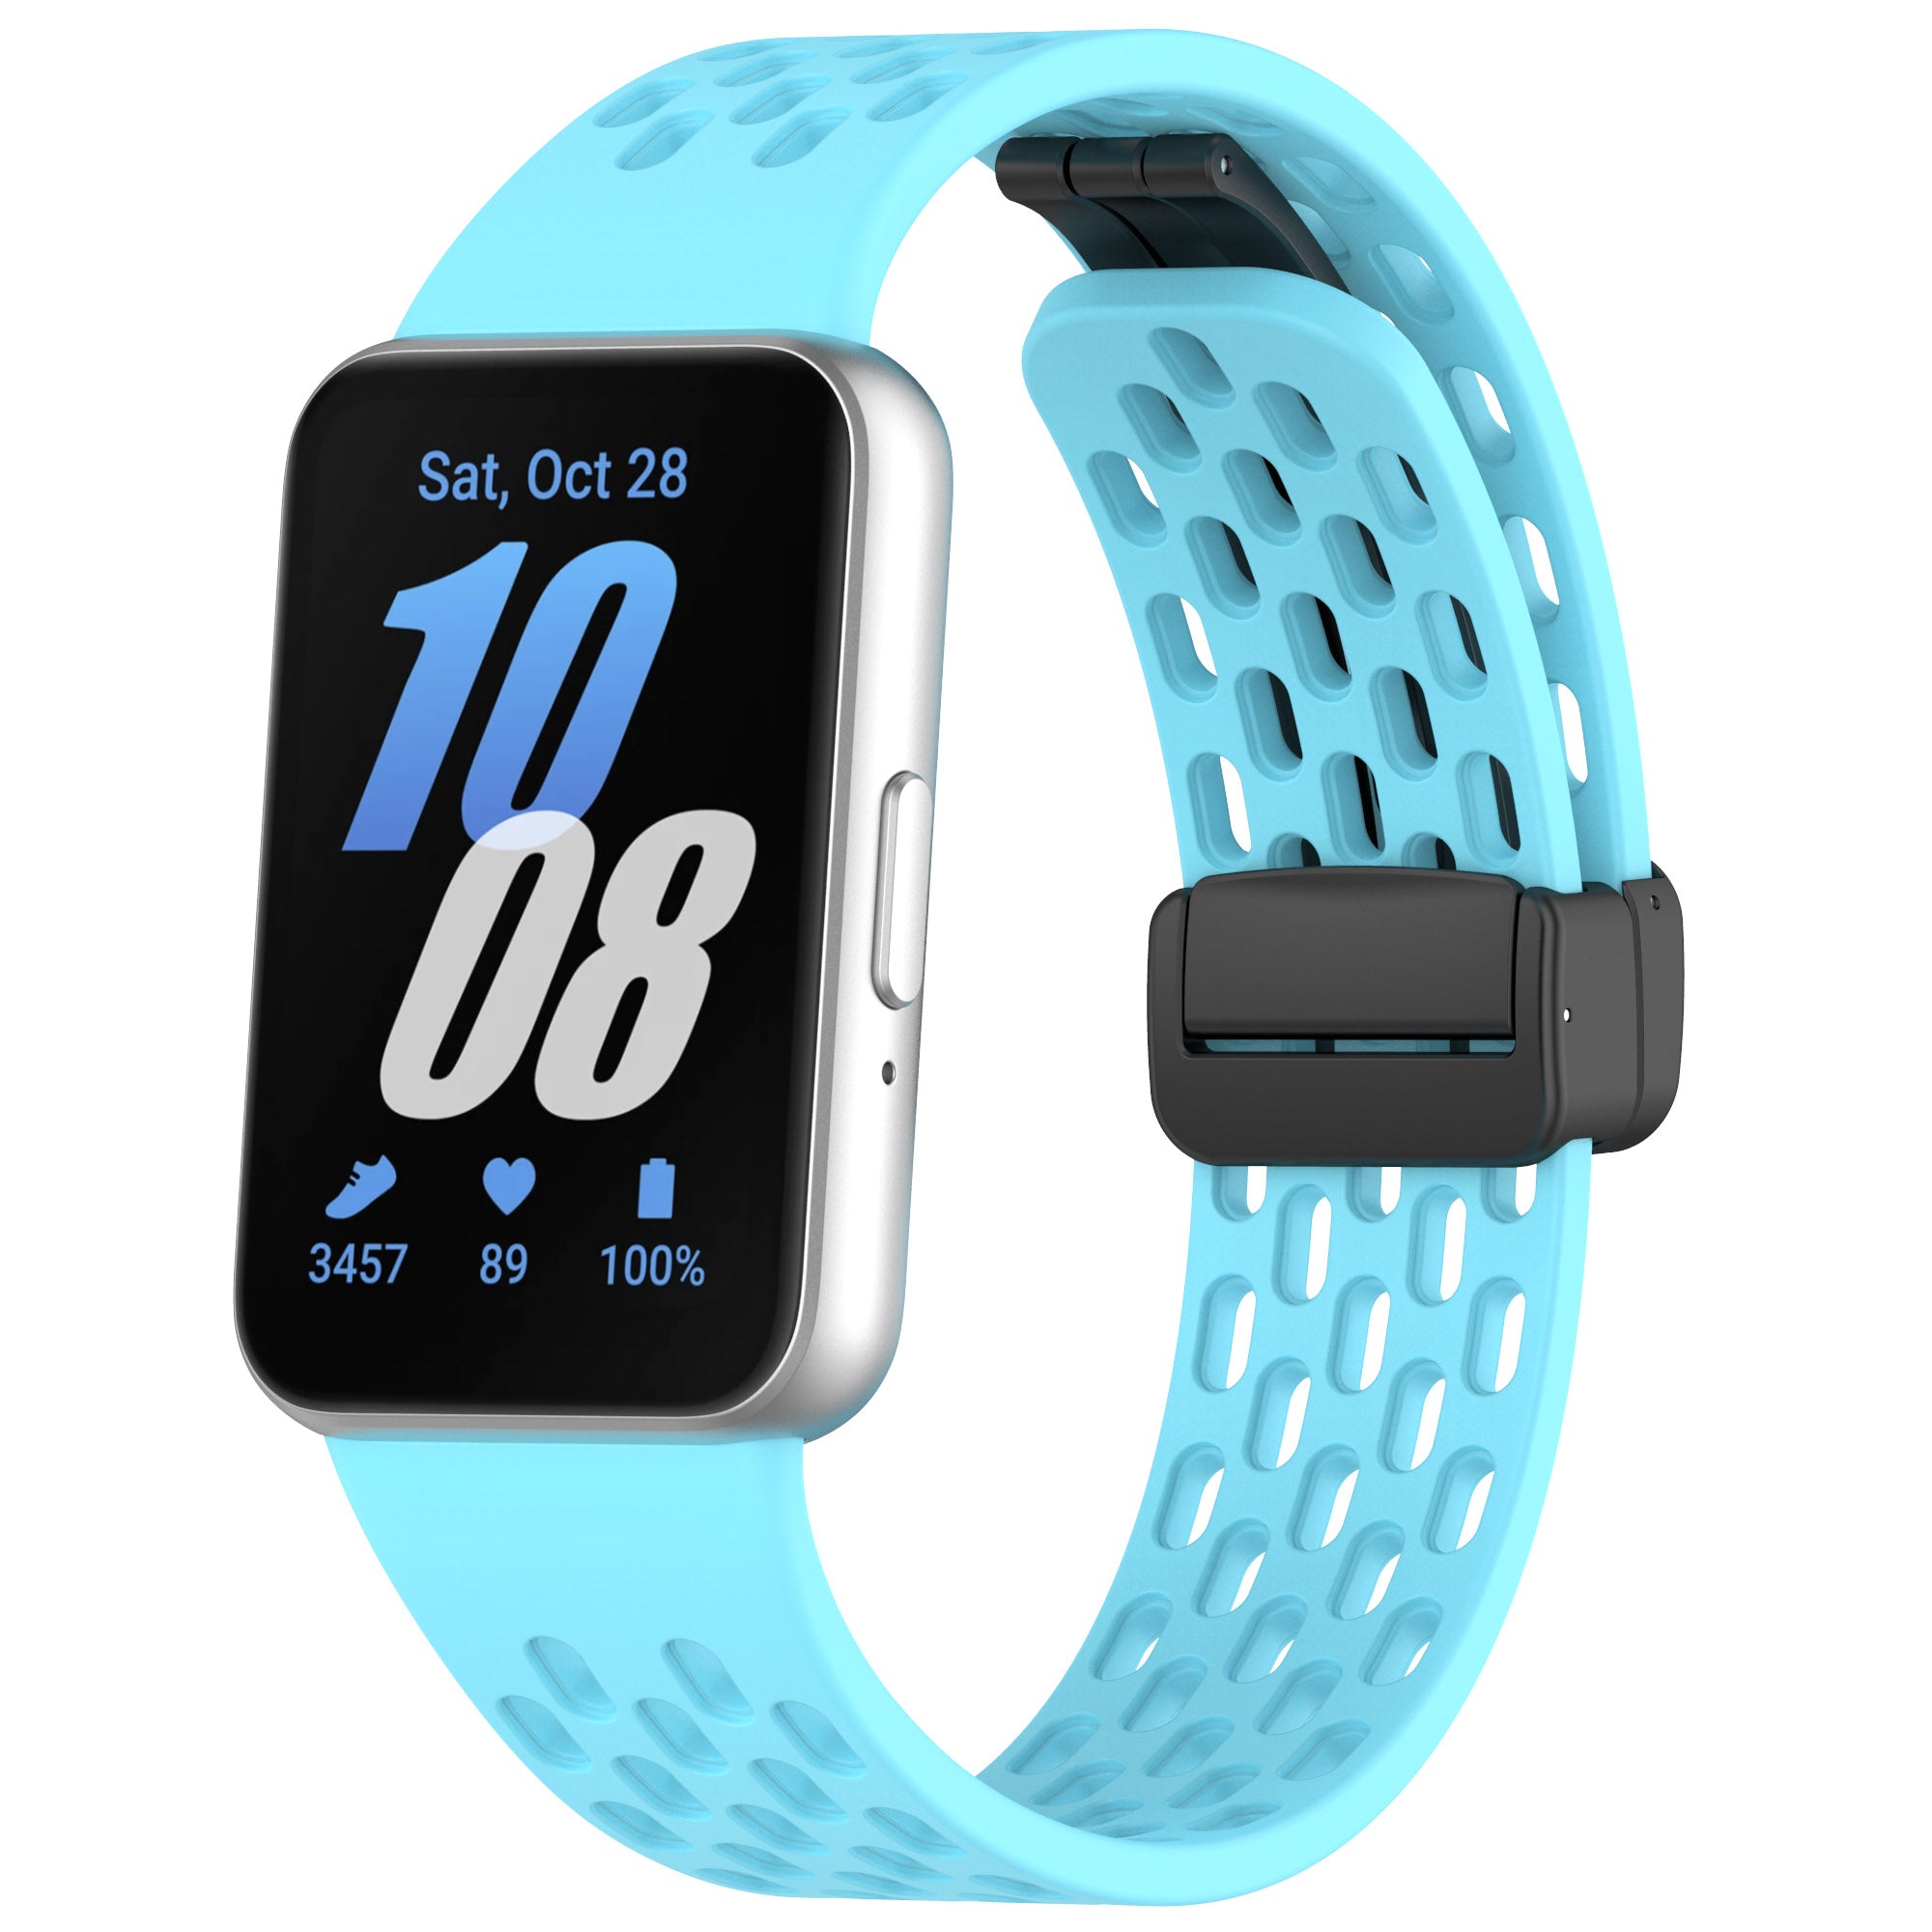 Wrist Band for Samsung Galaxy Fit3 R930 Magnetic Silicone Smartwatch Bracelet Strap - Blue